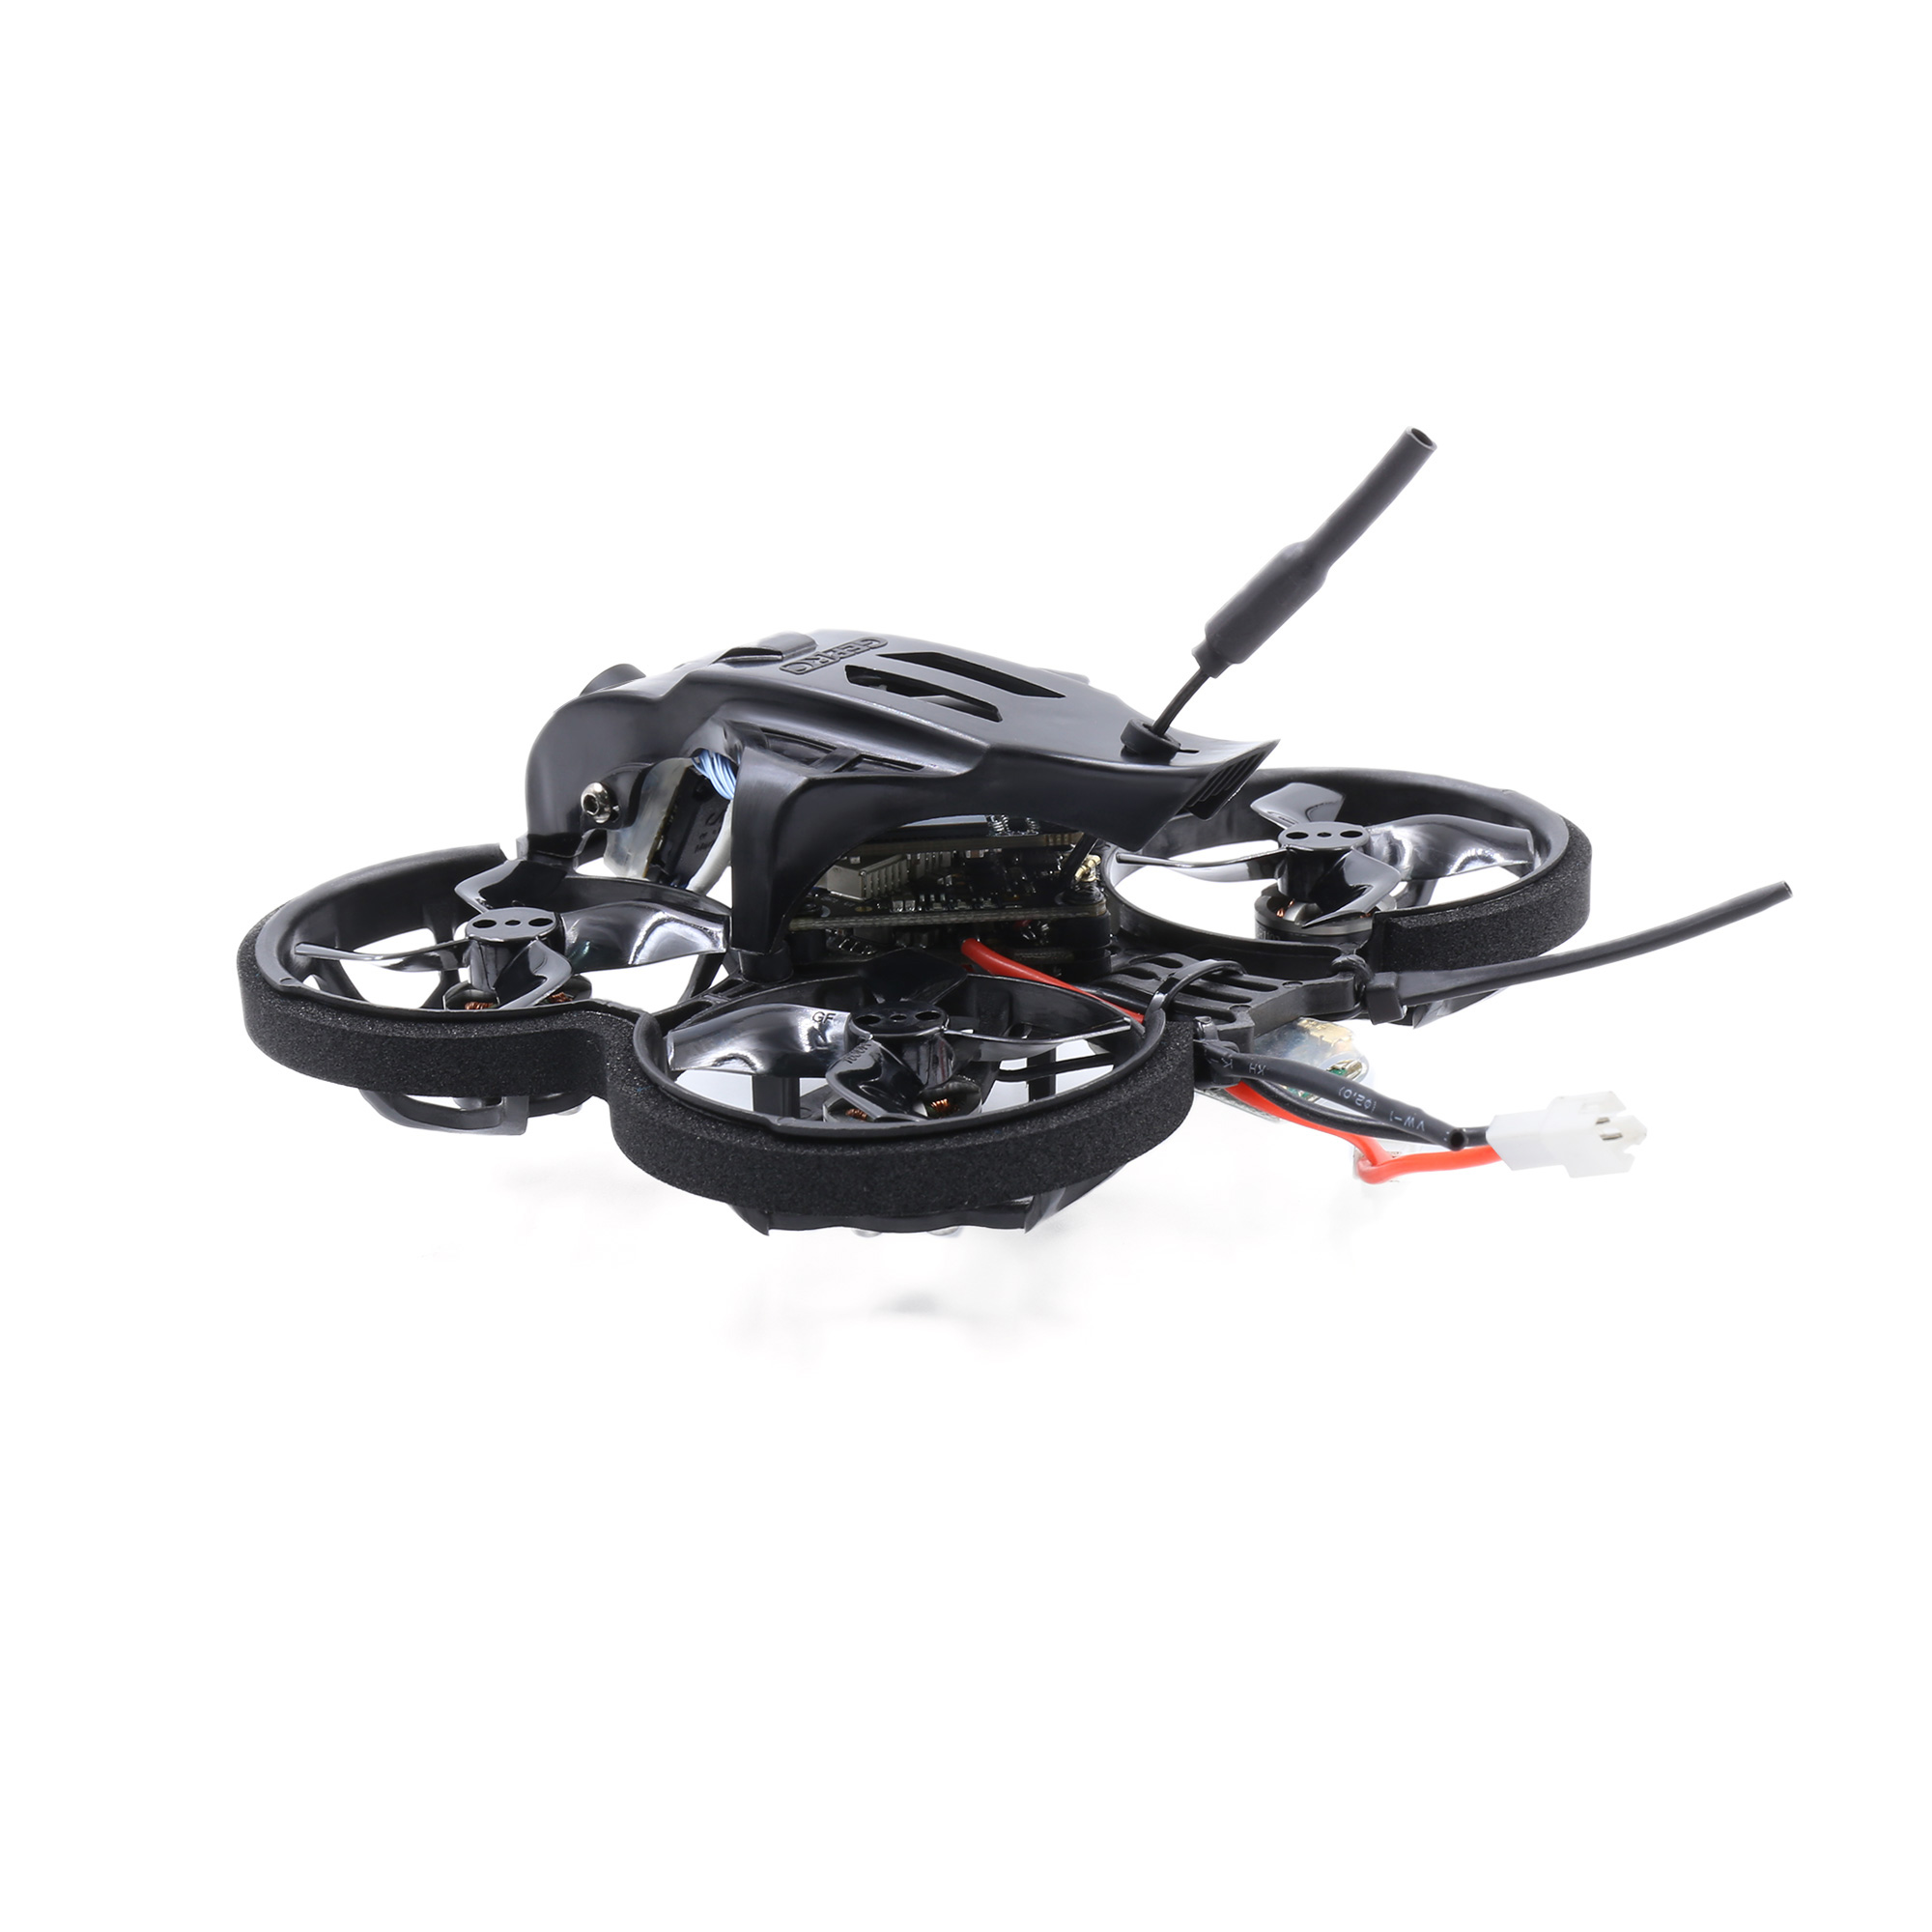 GEPRC TinyGO 1.6inch 2S 4K Caddx Loris FPV Indoor Whoop+GR8 Remote Controller+RG1 Goggles RTF Ready To Fly FPV Racing RC Drone 6